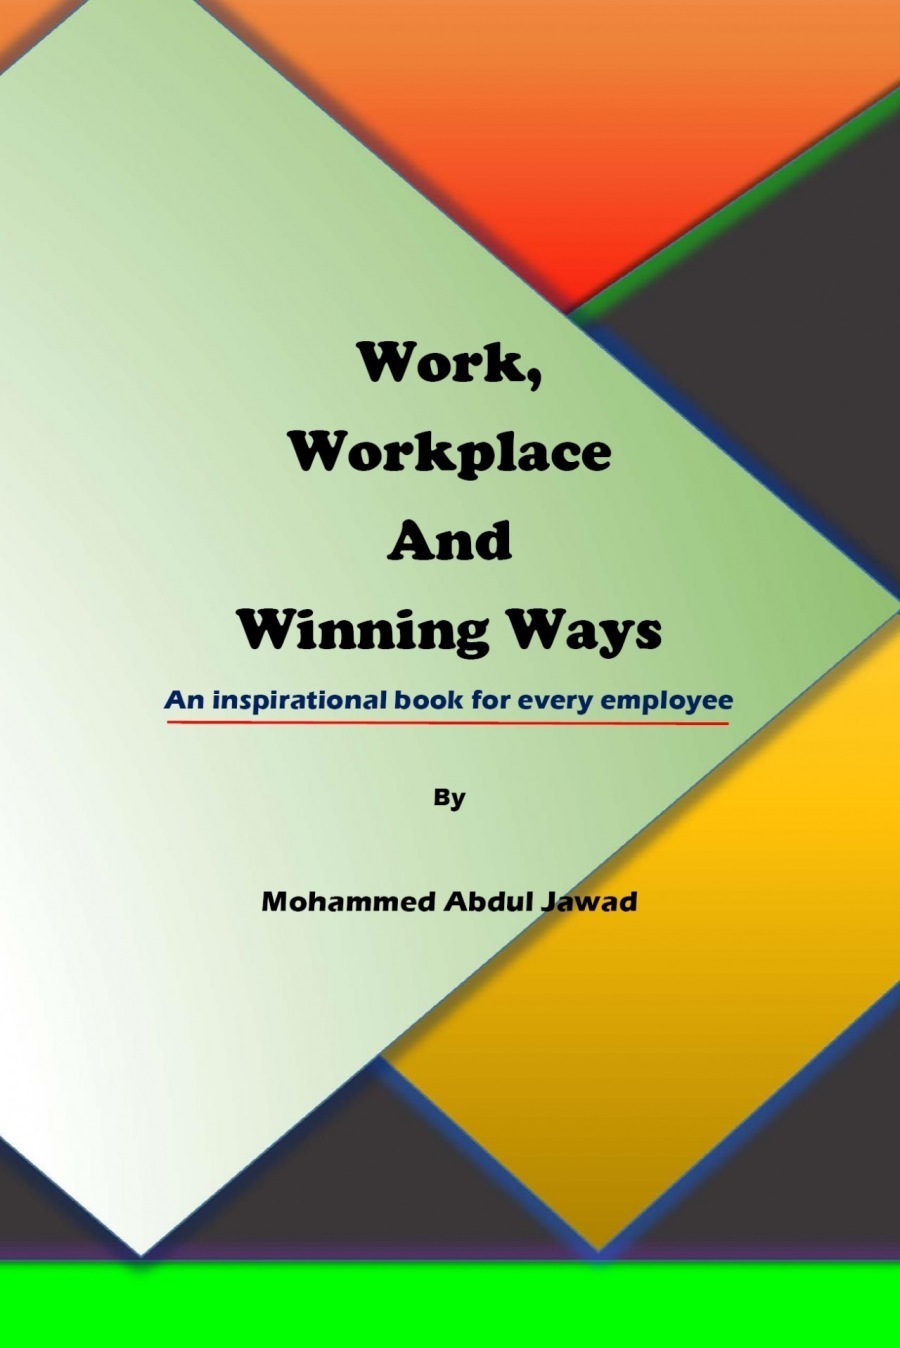 Work,
Workplace
And
Winning Ways

An inspirational book for every employee
By

Mohammed Abdul